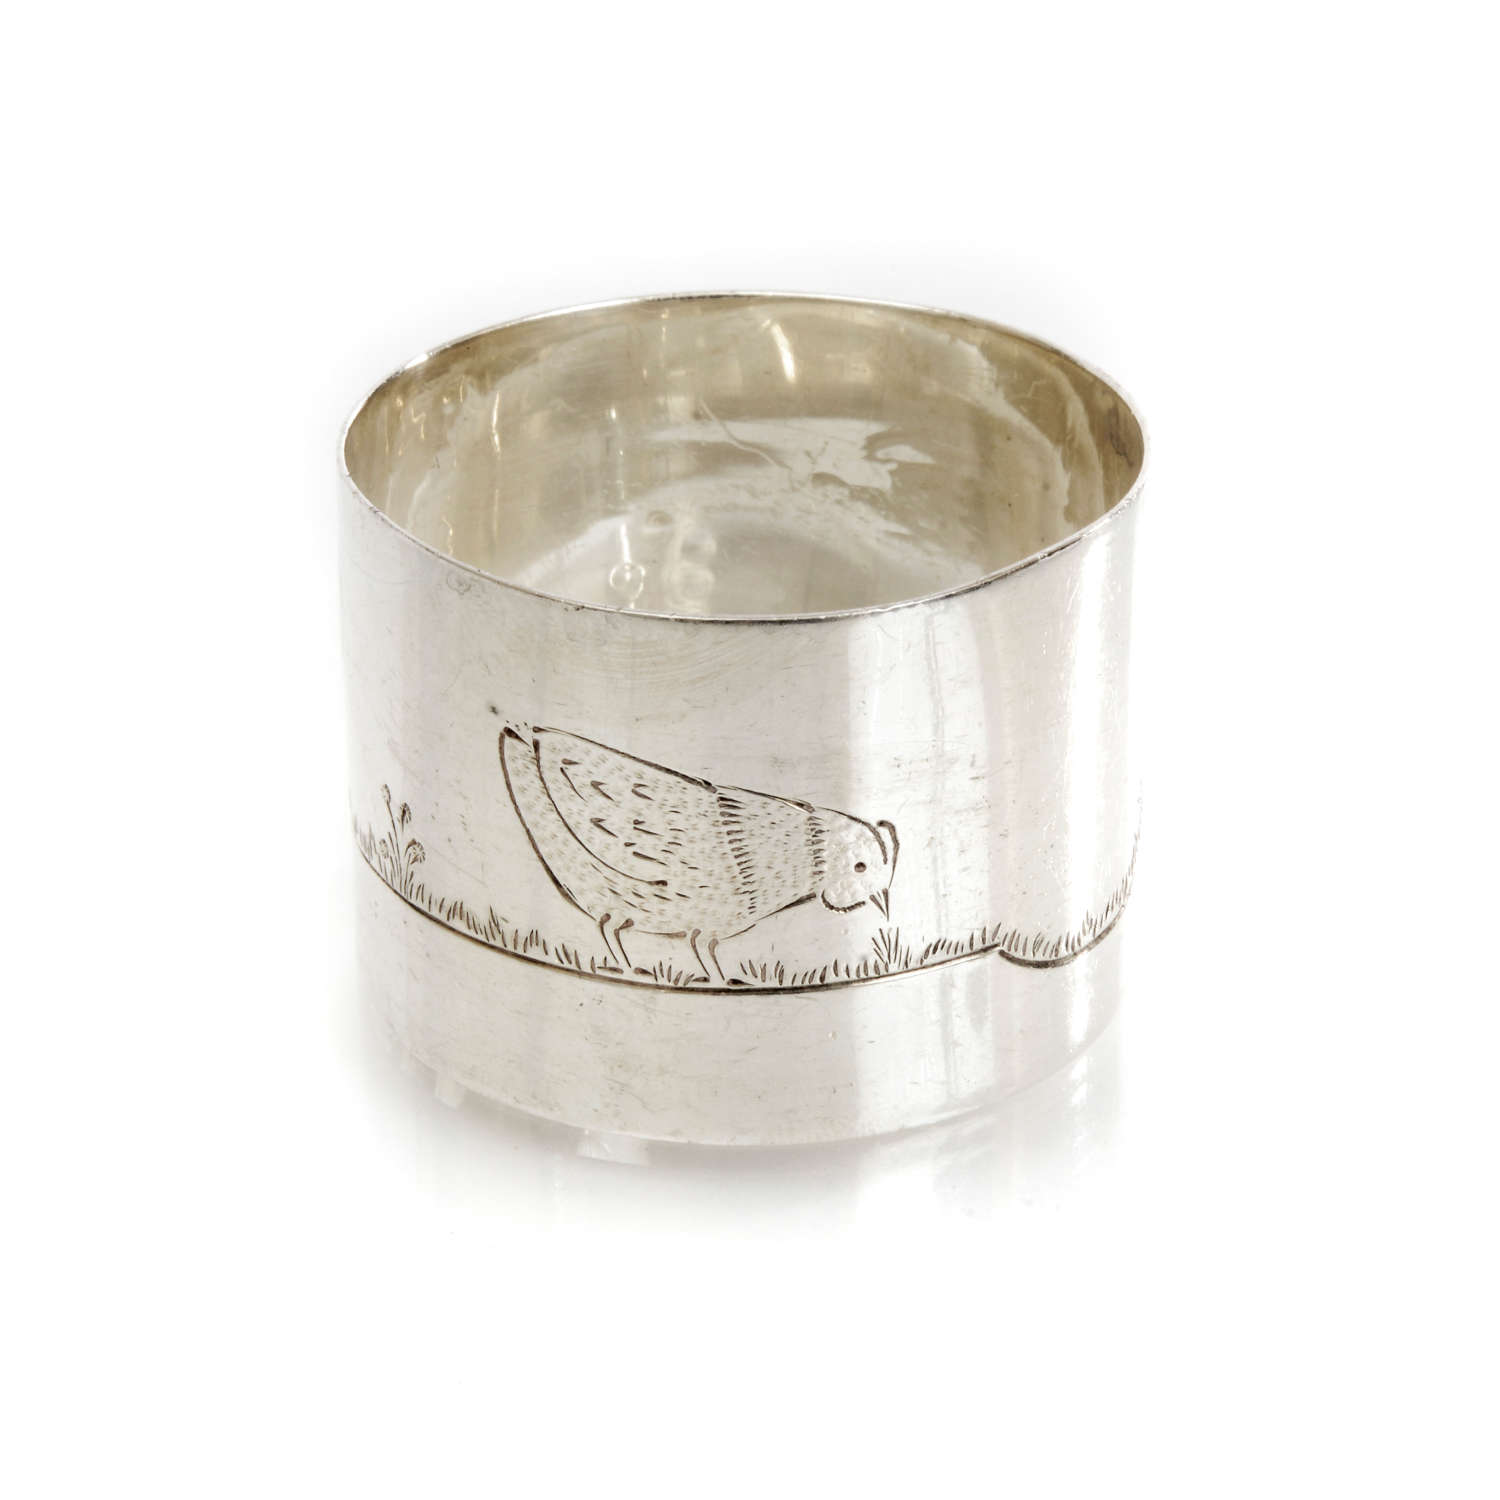 A Charming Silver Napkin Ring